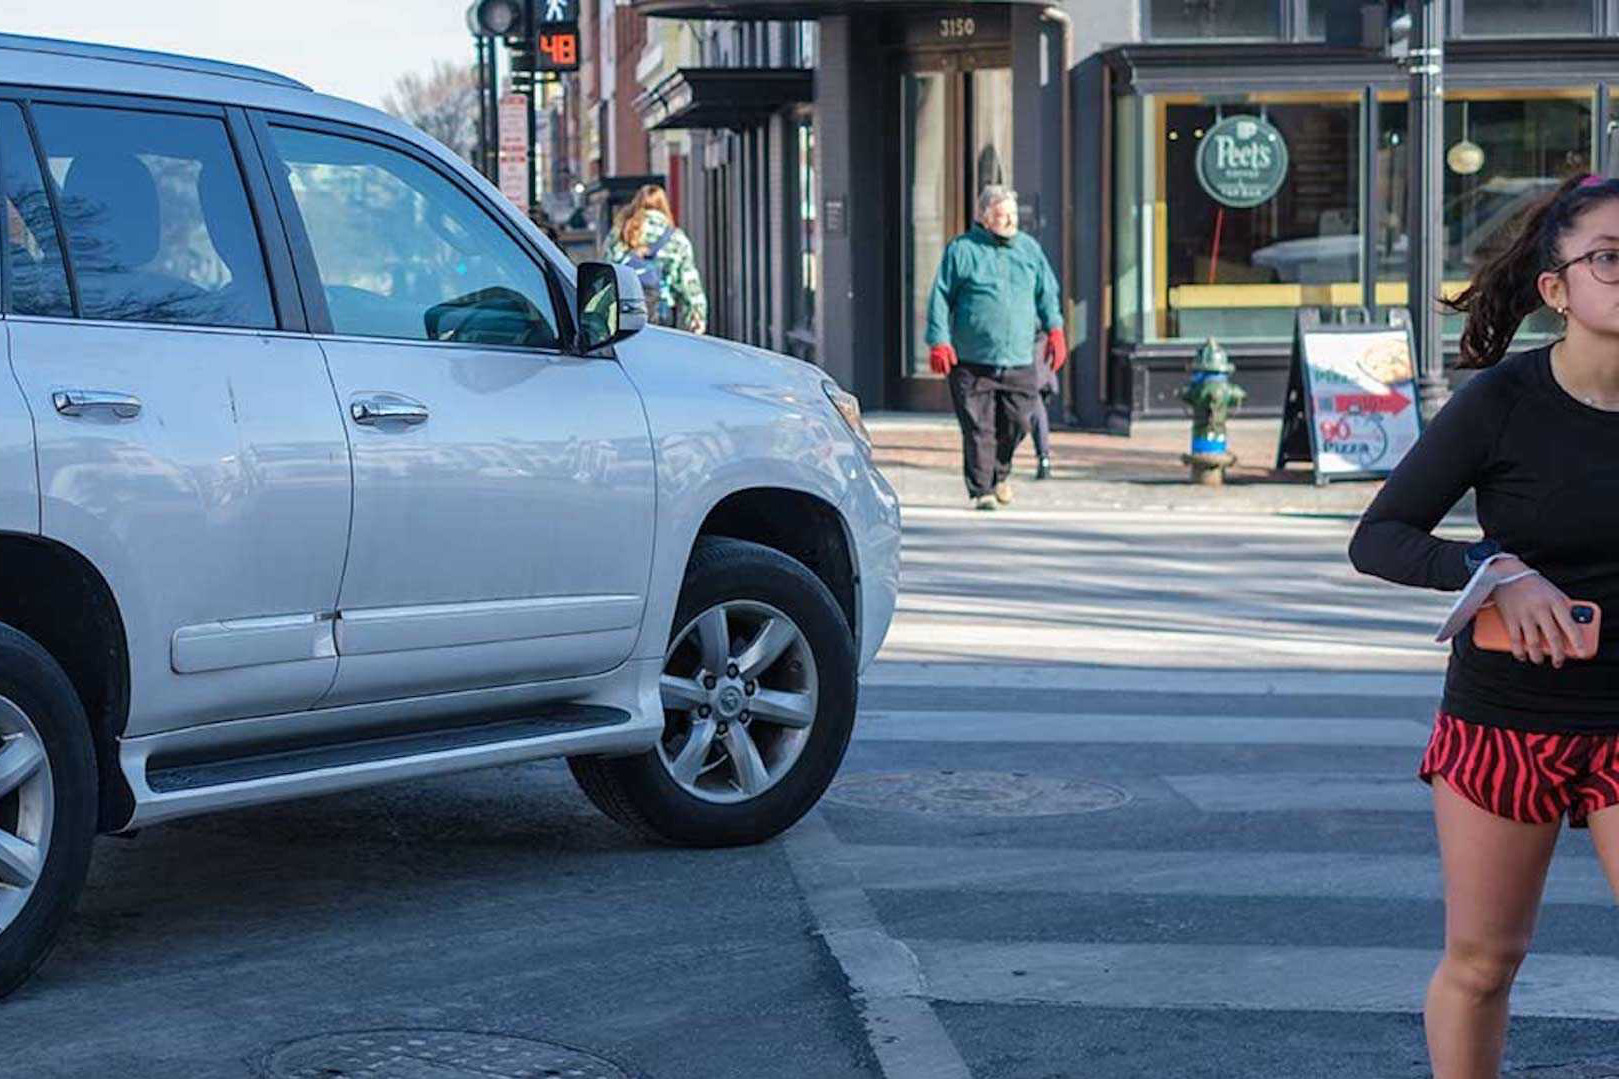 The proliferation of SUVs increases the danger on the road